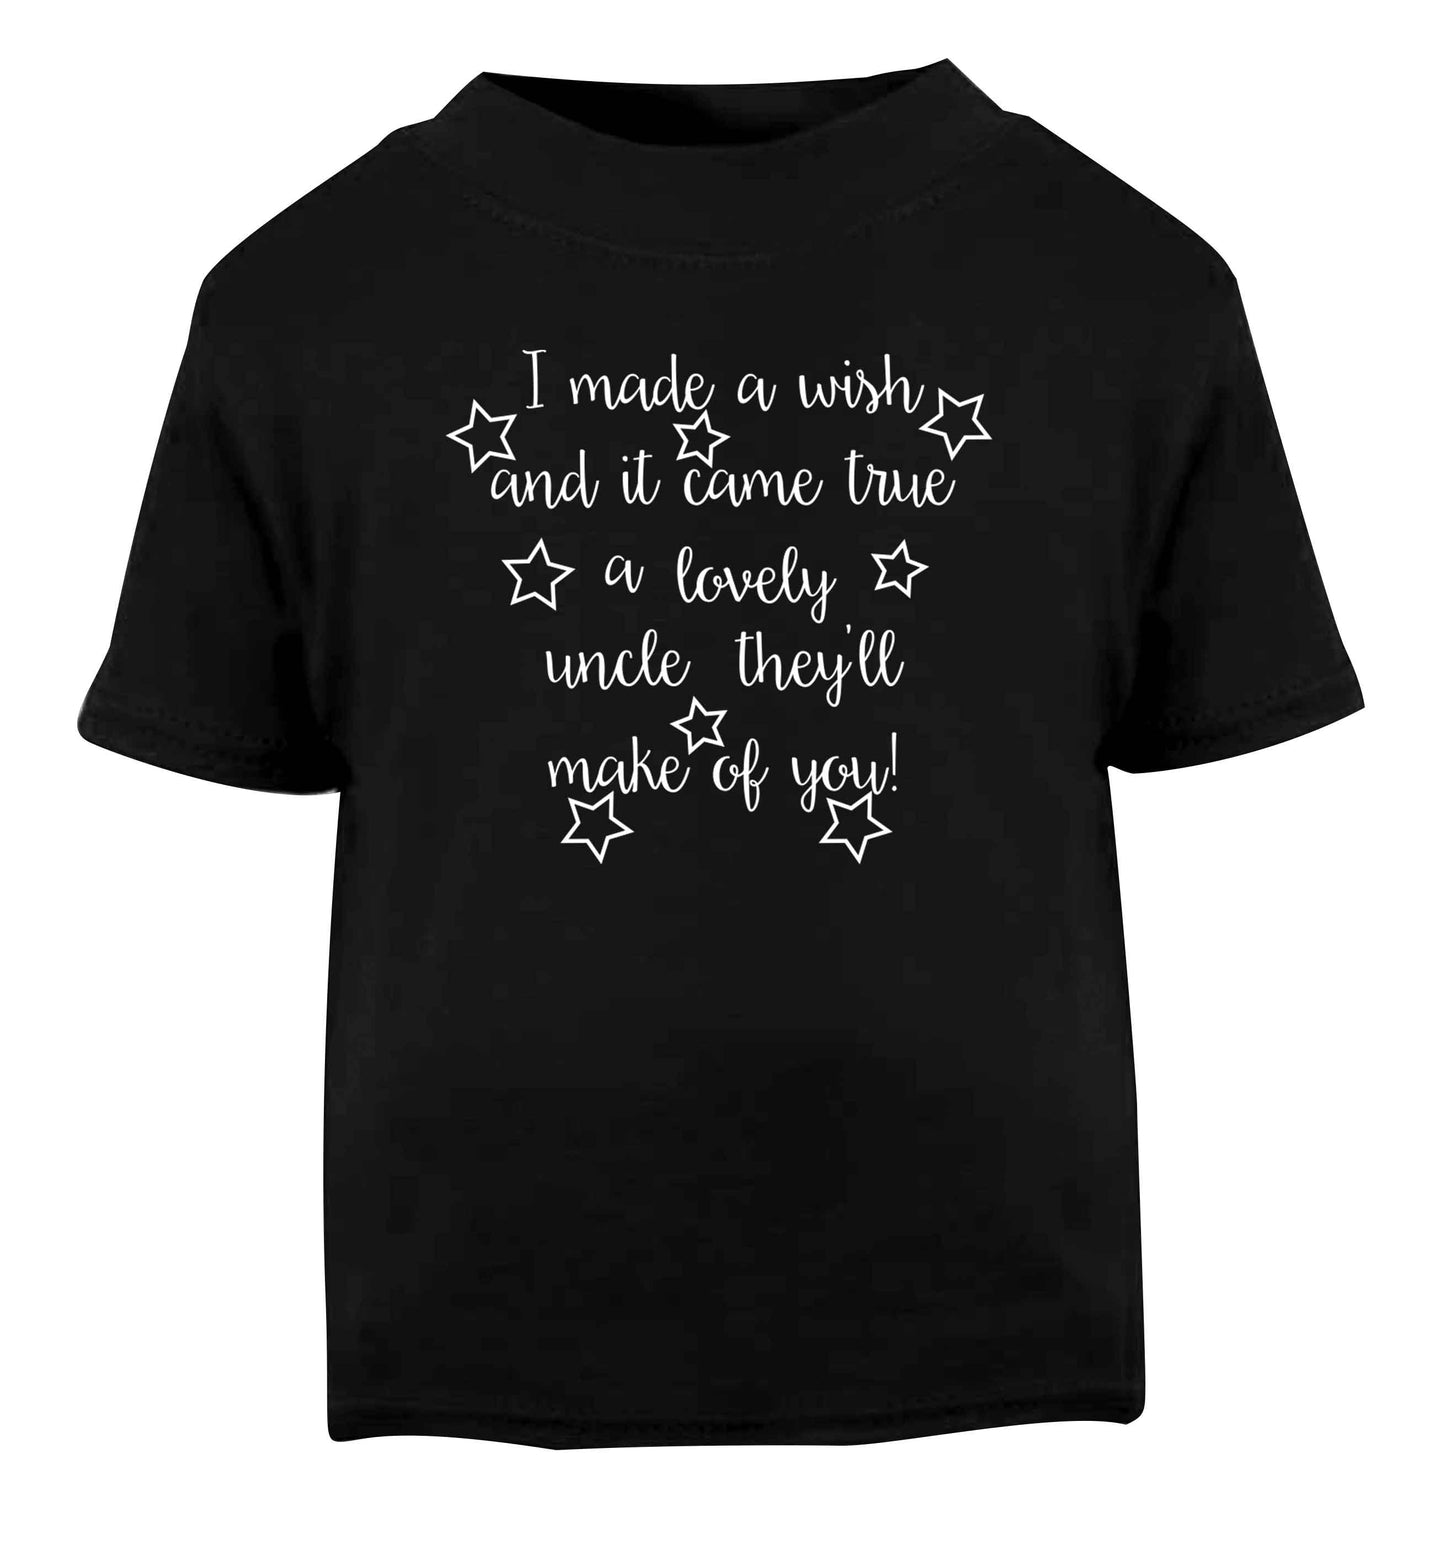 I made a wish and it came true a lovely uncle they'll make of you! Black Baby Toddler Tshirt 2 years